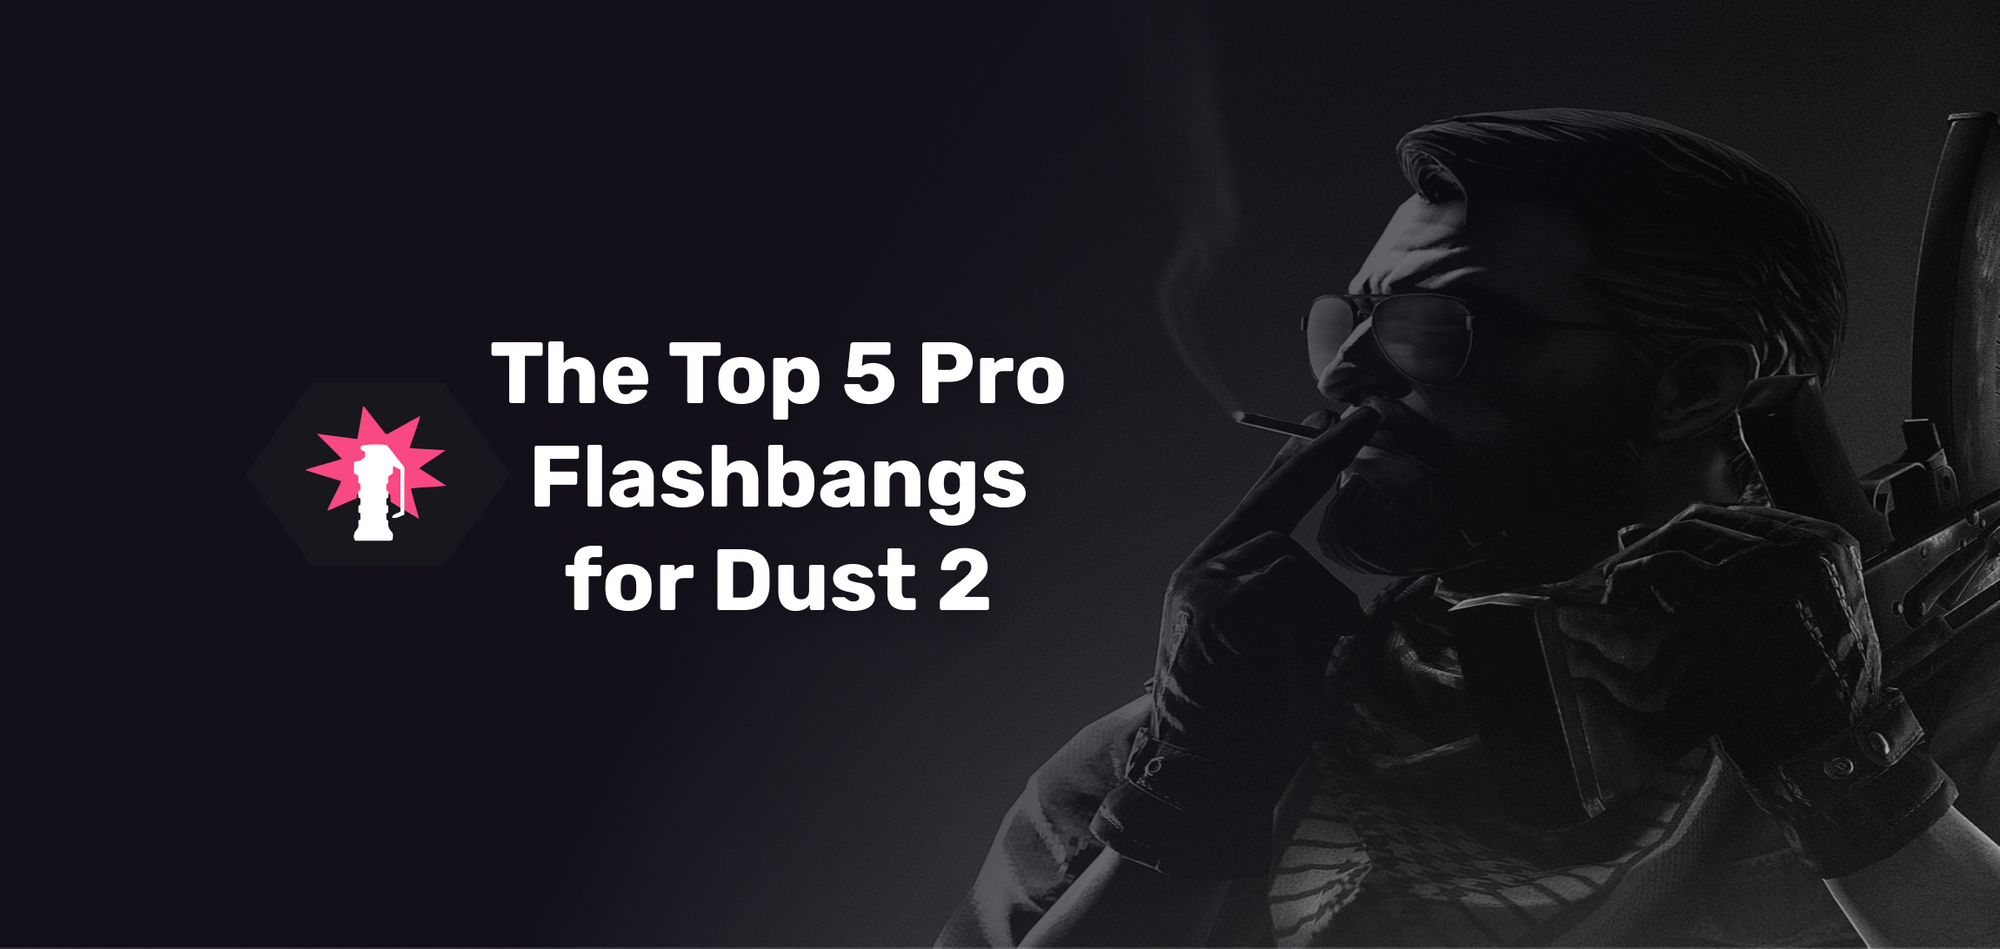 The Top 5 Pro Flashbangs for Dust 2